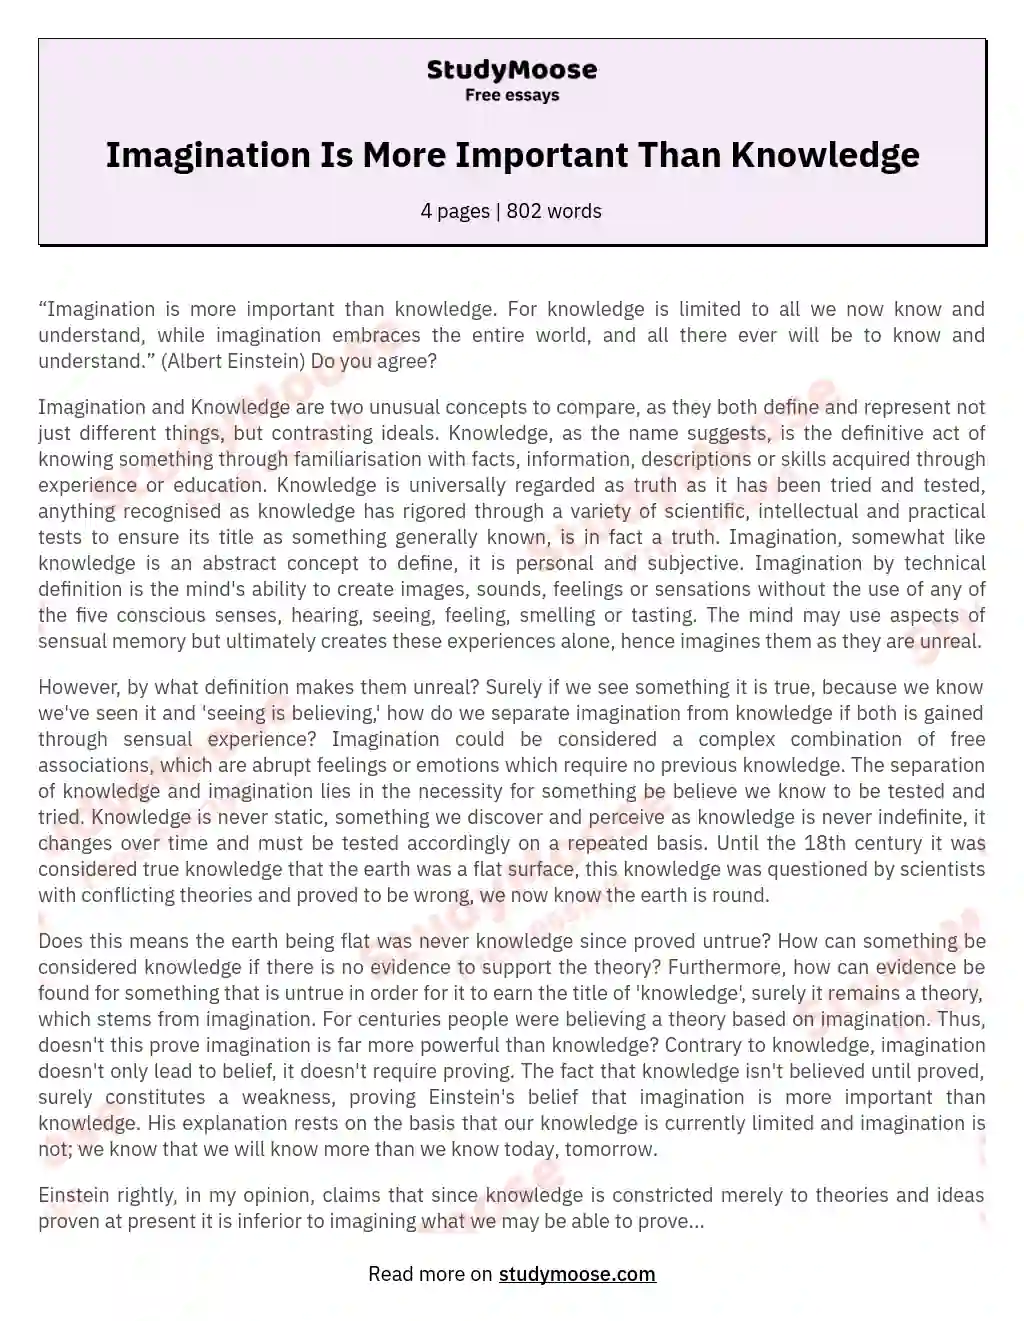 Imagination Is More Important Than Knowledge essay